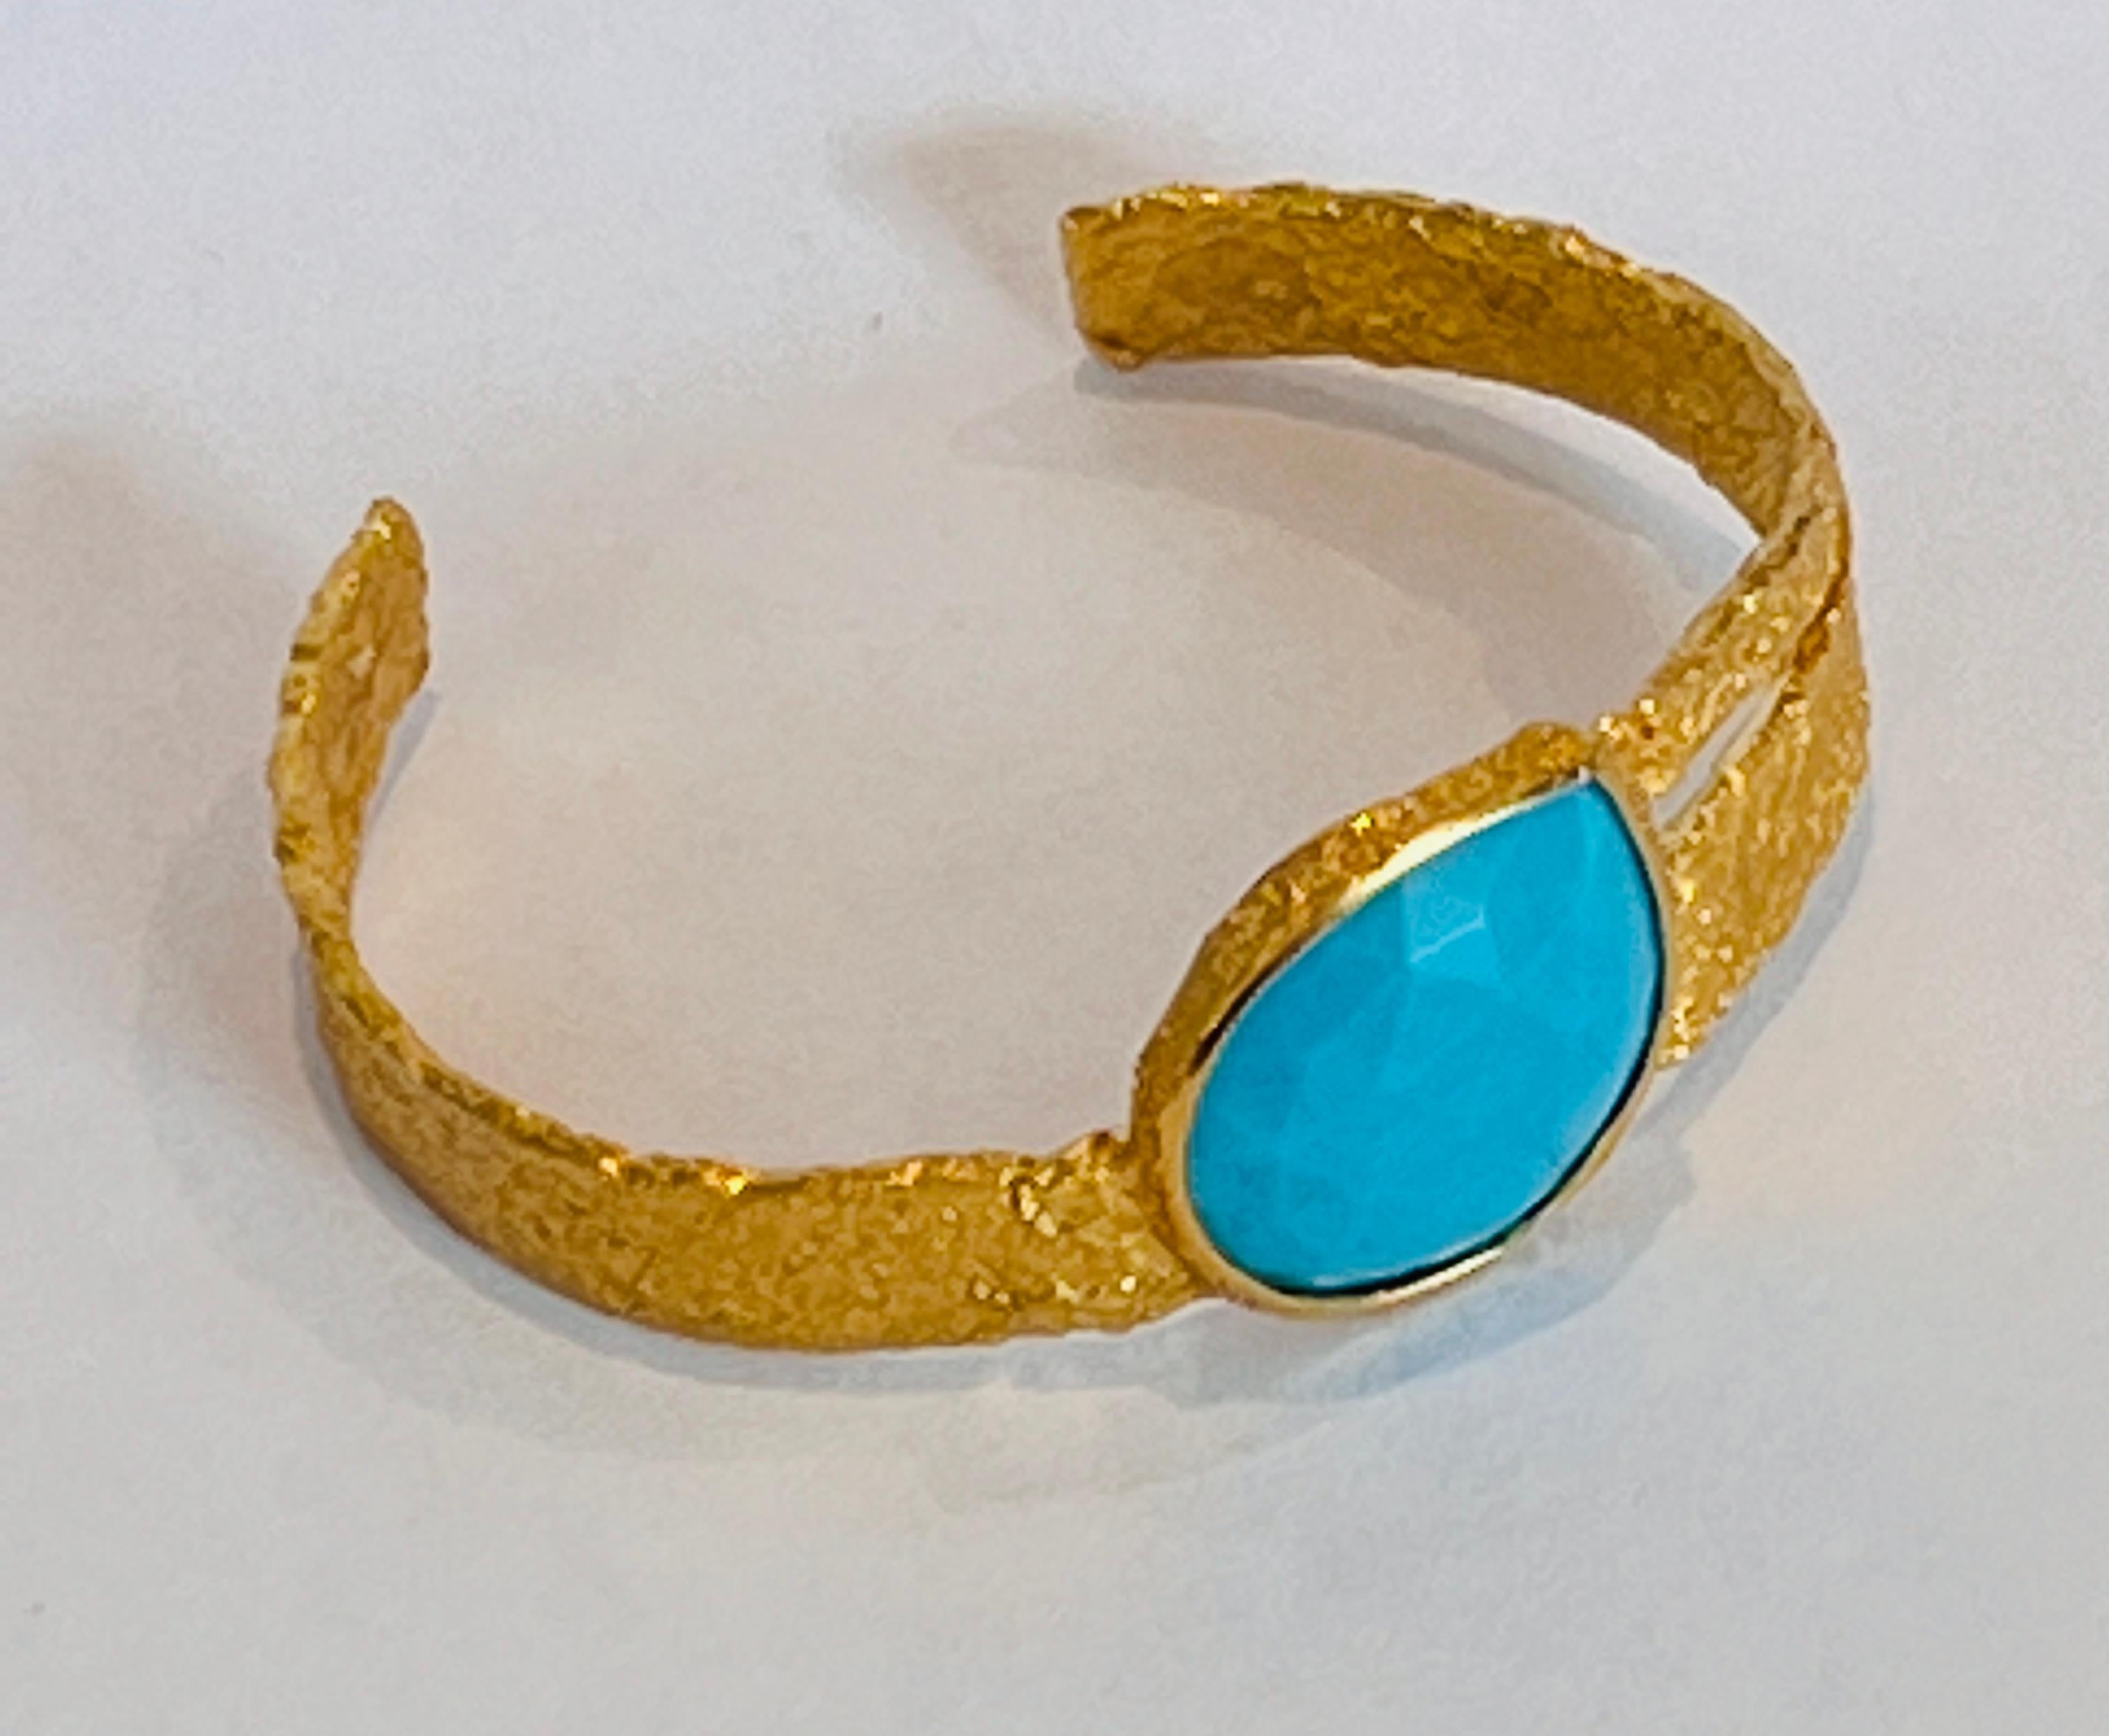 22k Gold Handmade Cuff with Turquoise, by Tagili For Sale 1